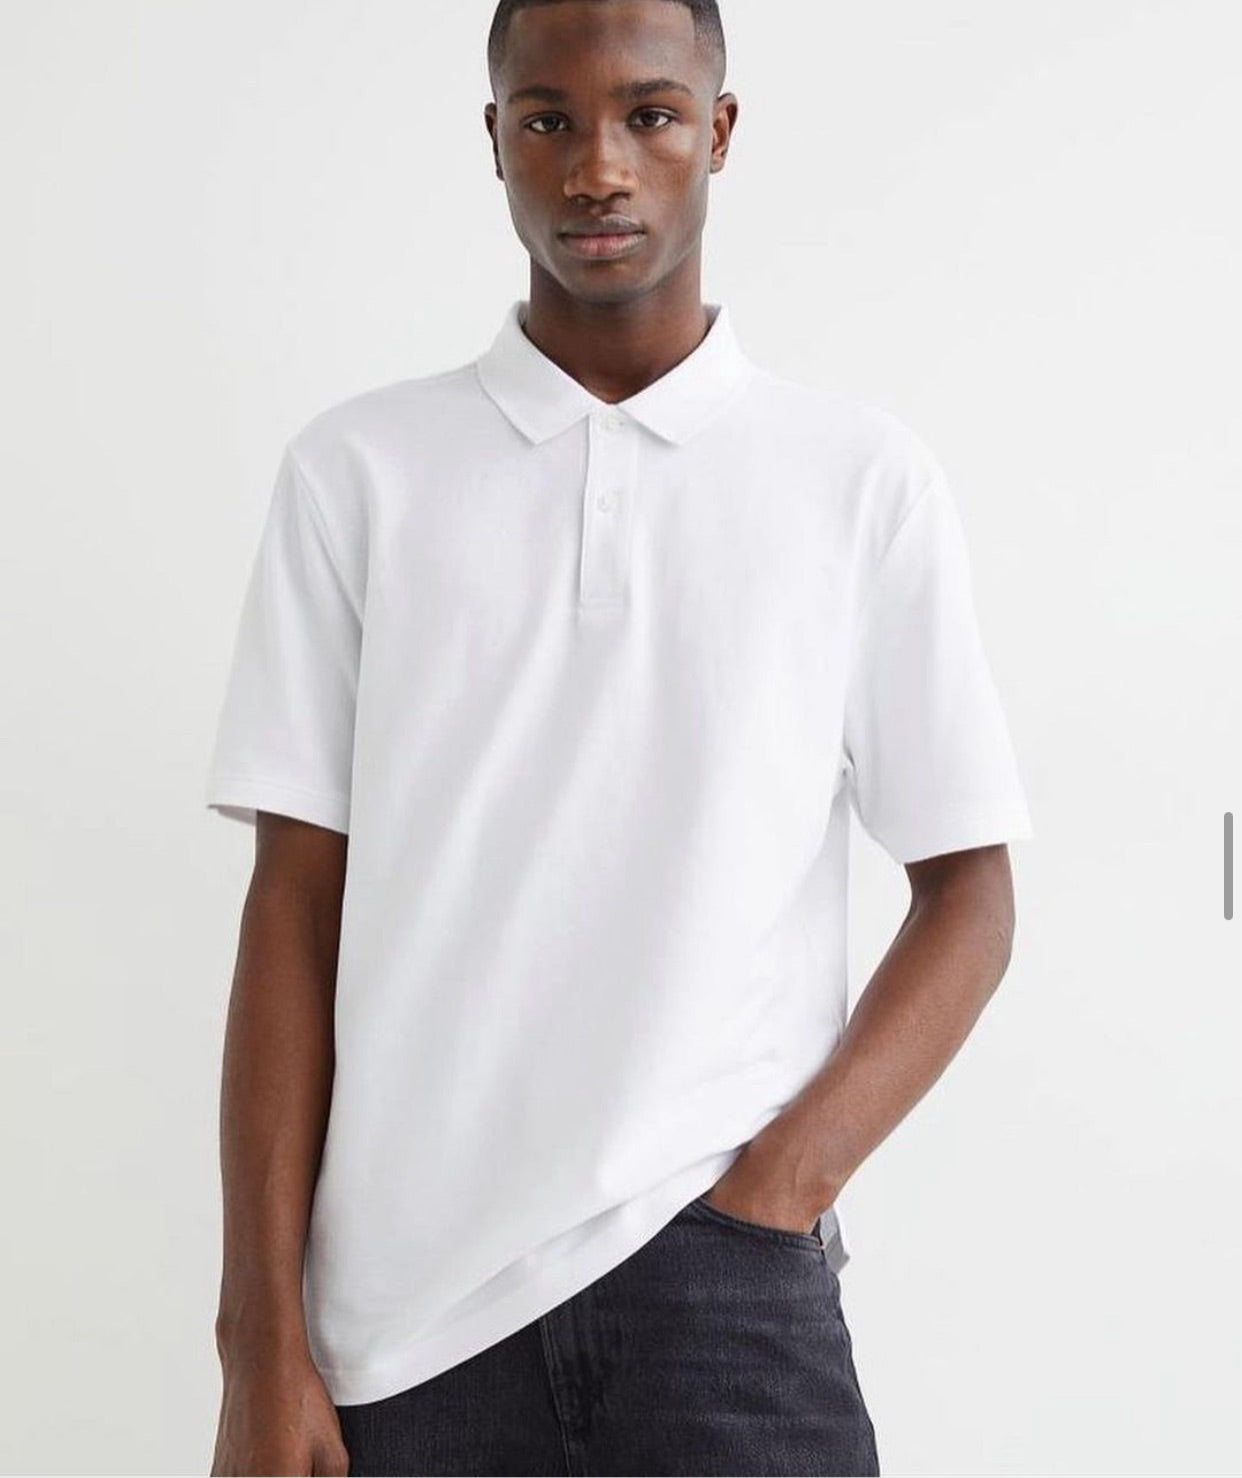 ID polo shirt in white